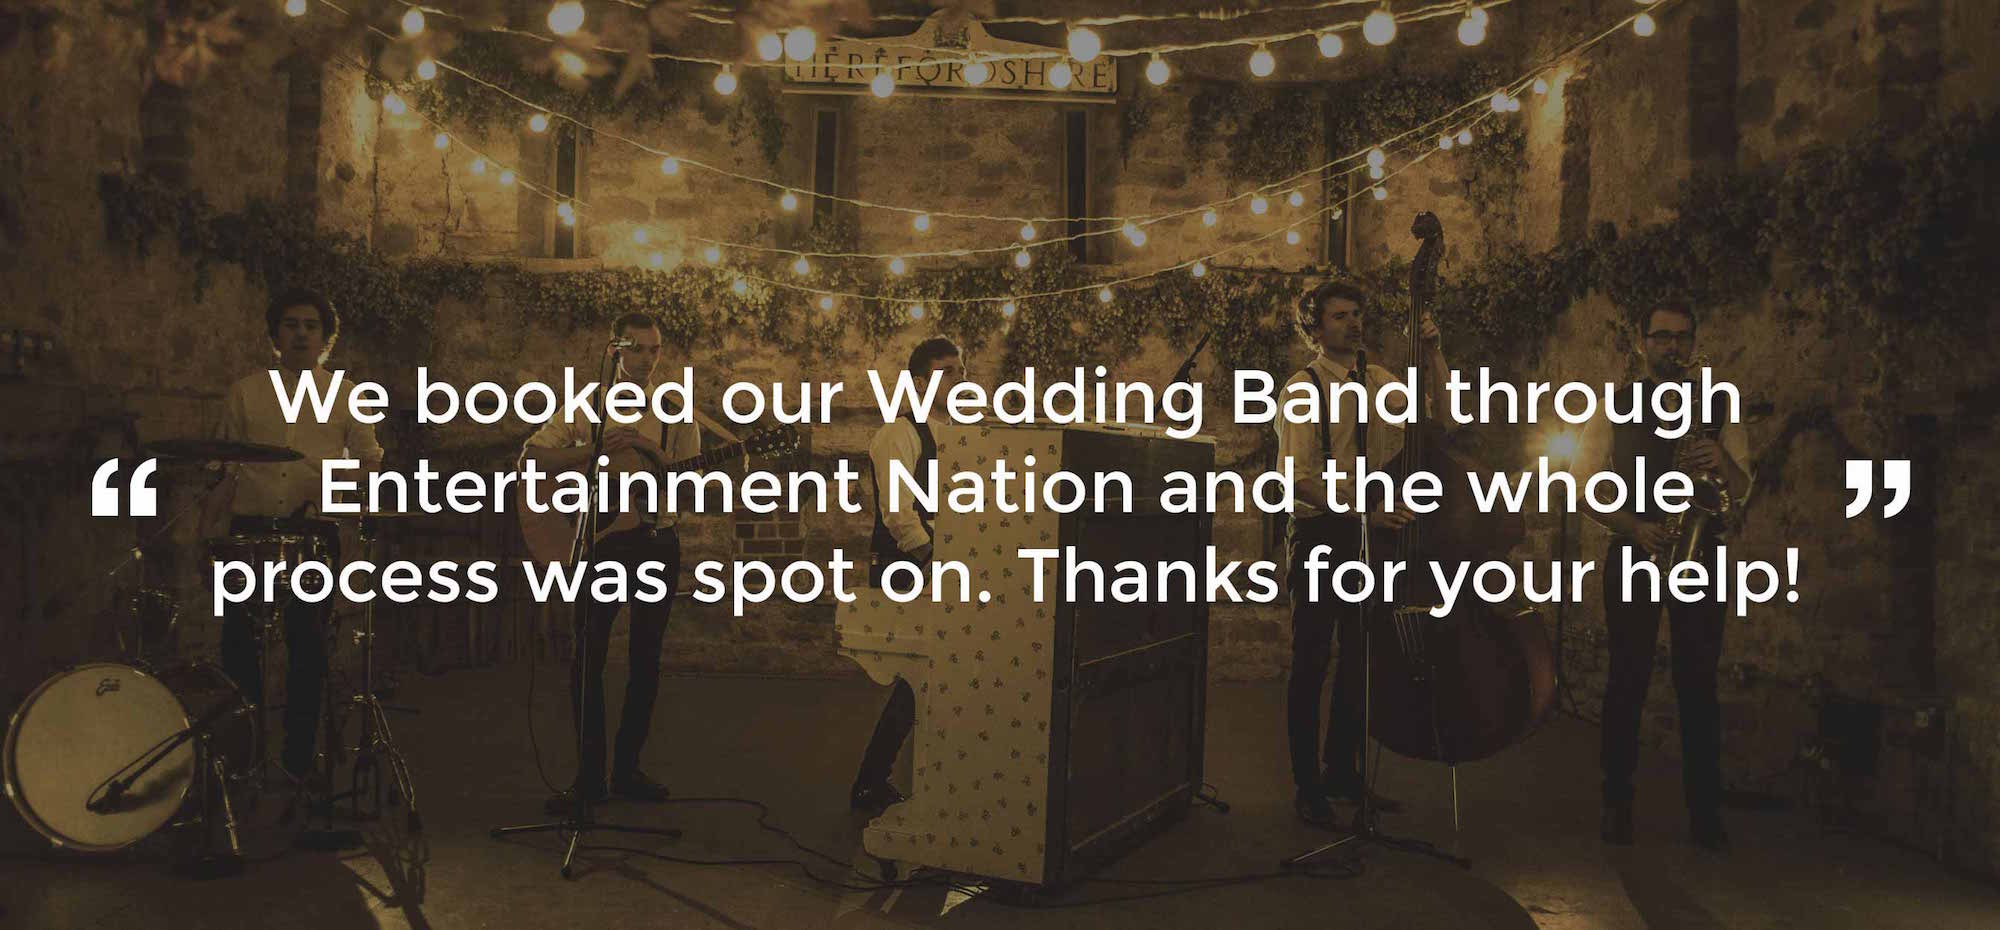 Review of Wedding Band Cambridge